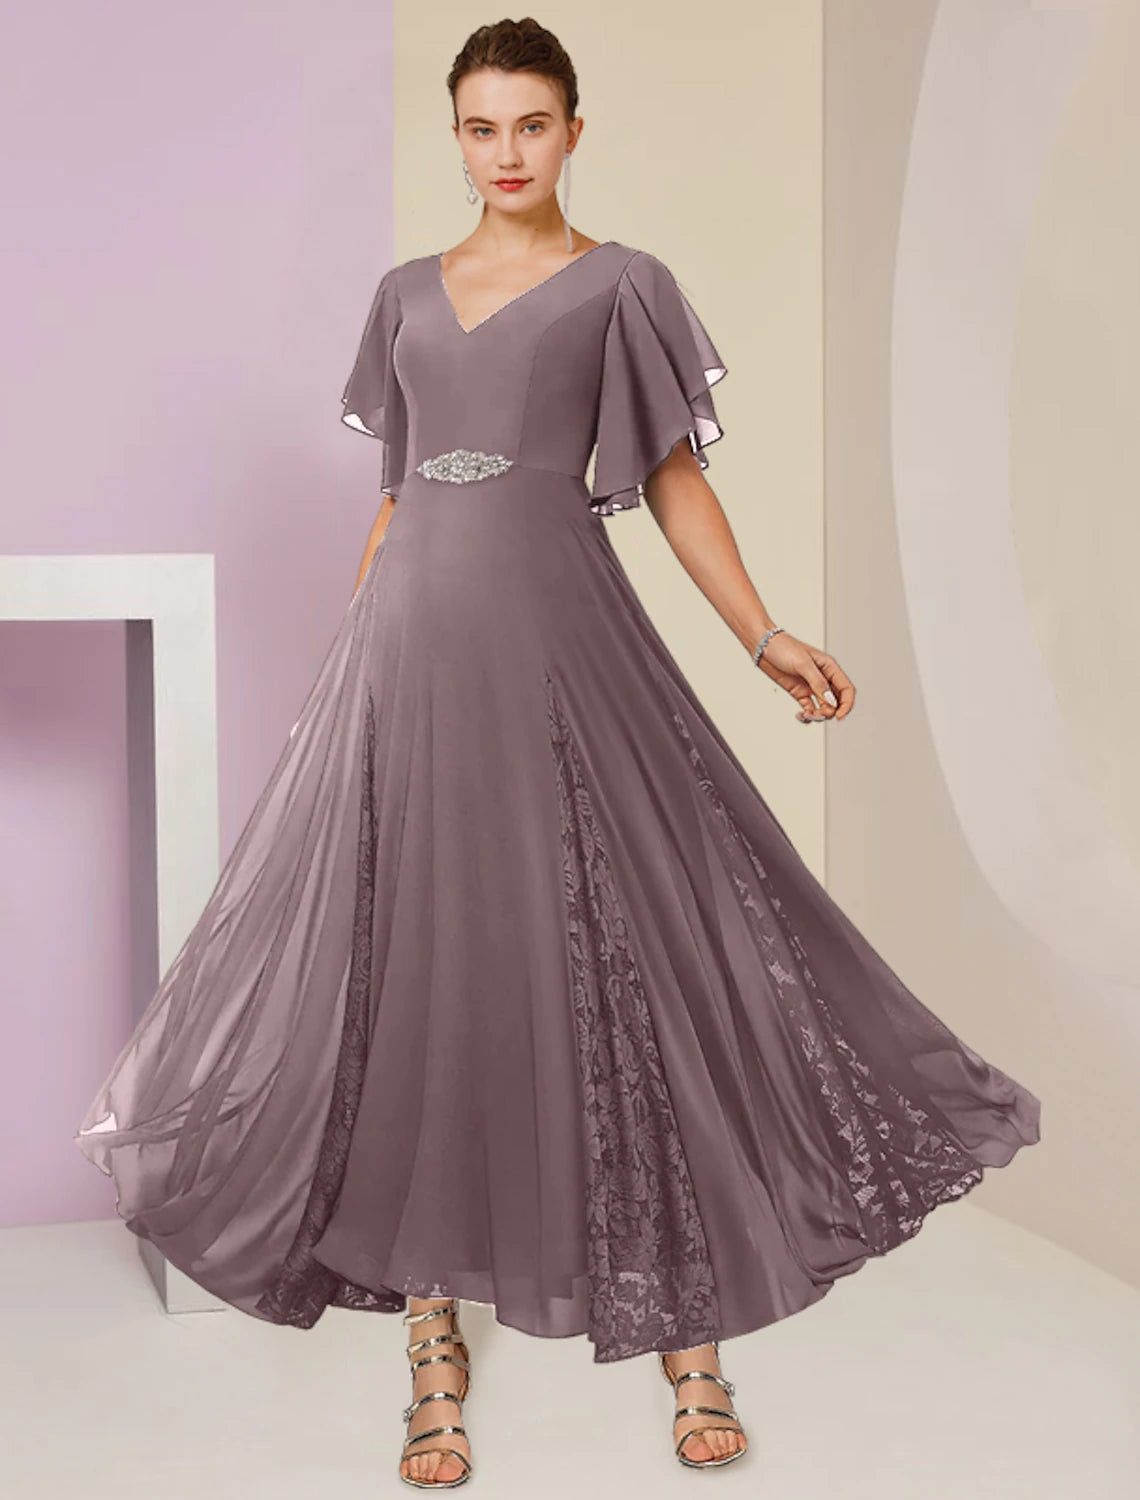 A-Line Mother of the Bride Dress Formal Wedding Guest Elegant V Neck Ankle Length Chiffon Lace Short Sleeve with Pleats Crystal Brooch